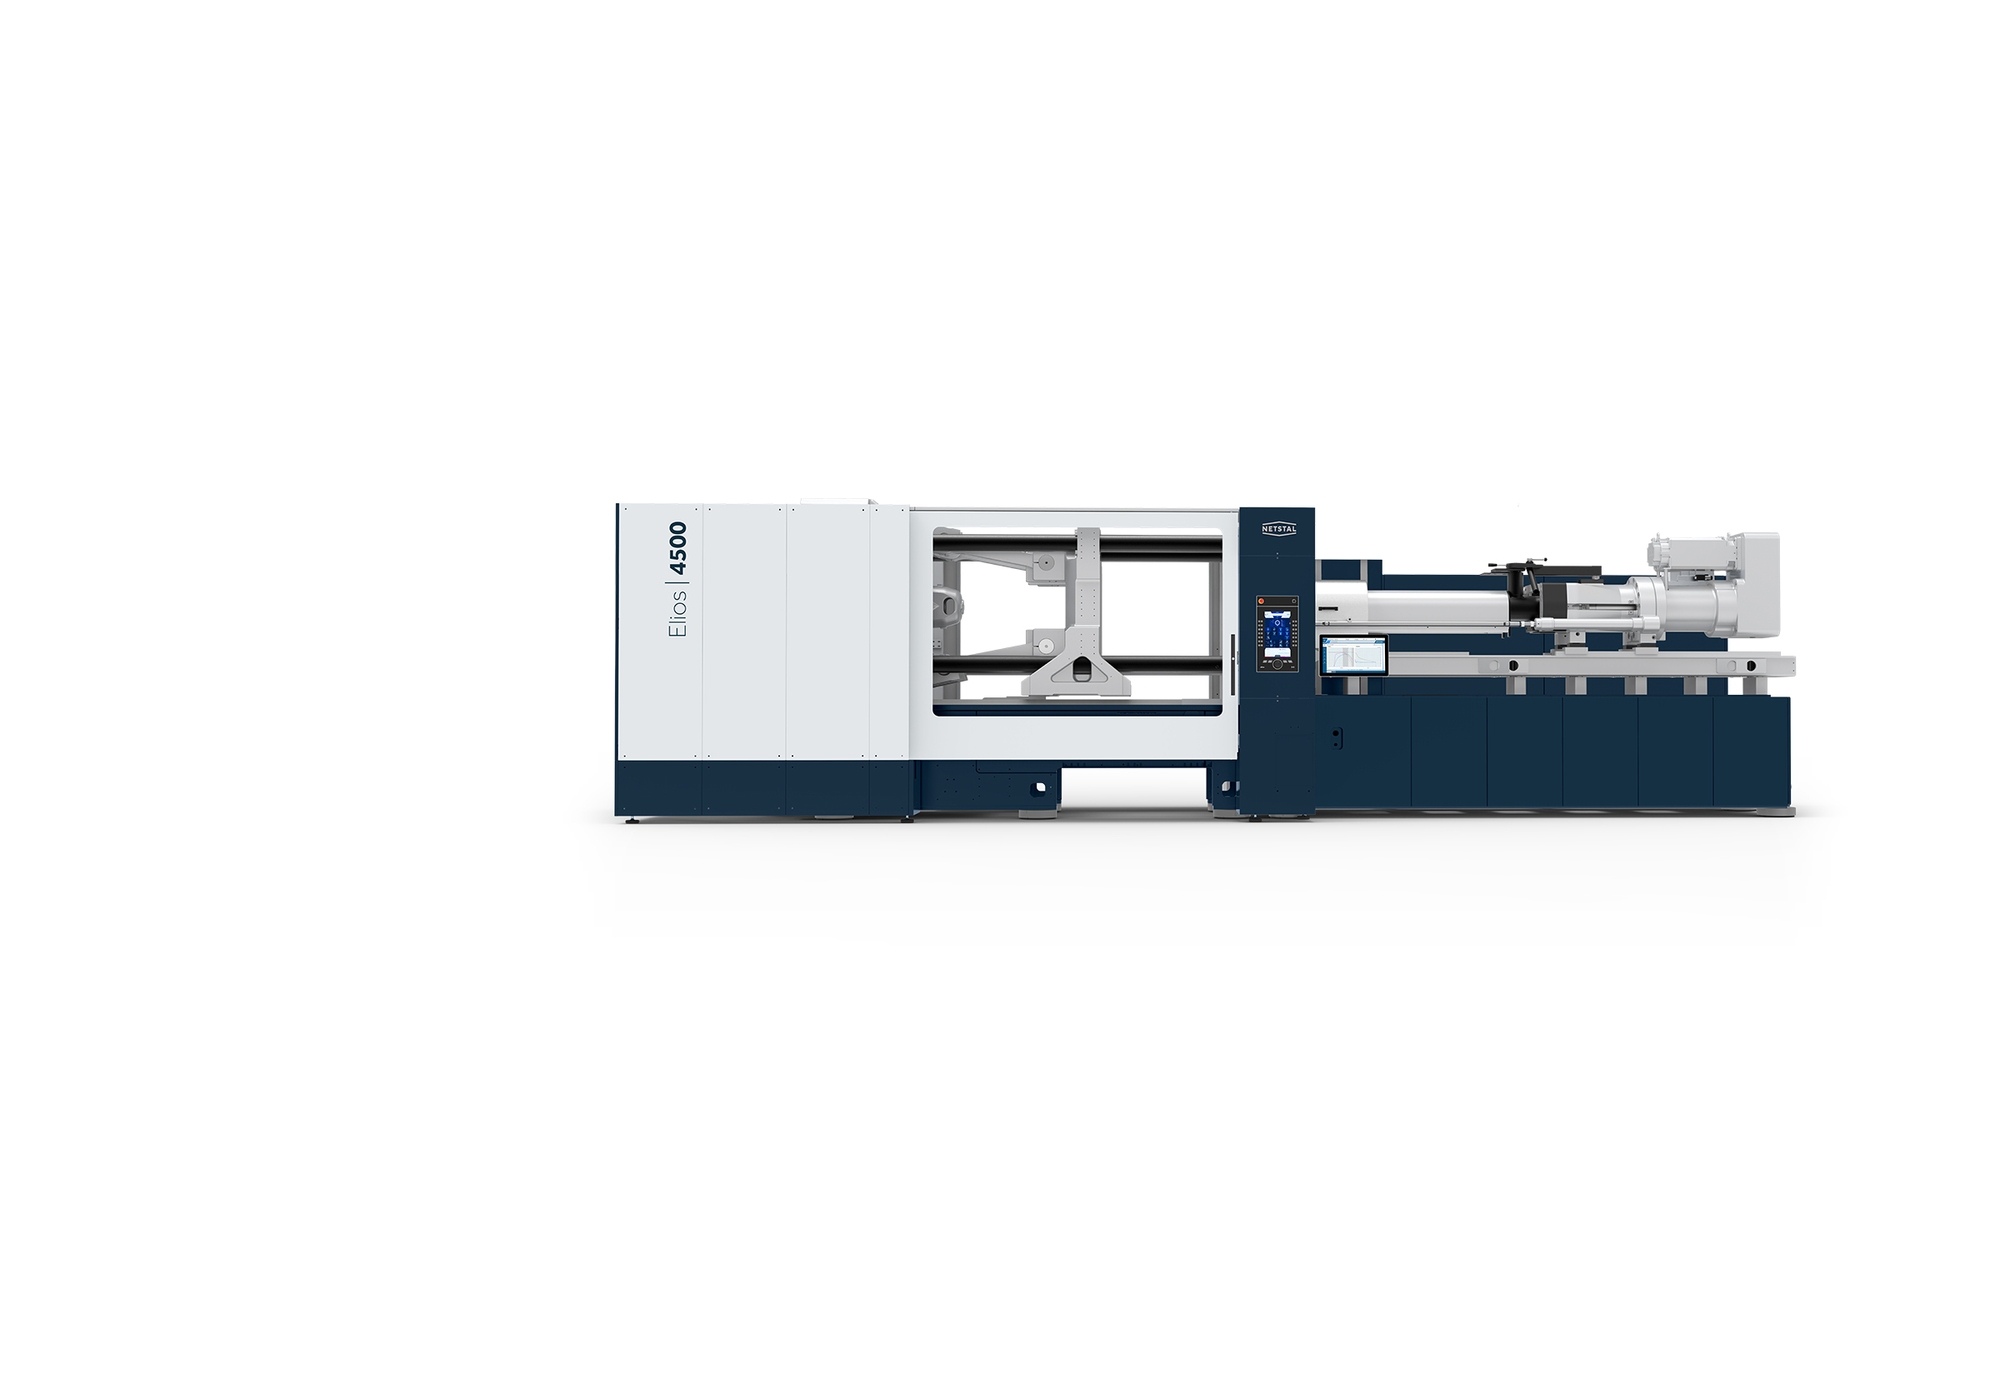 Strong, quick, accurate, energy-saving, and user-focused: The ELIOS Series creates new standards for high-performance injection moulding with its cutting-edge drive technology.